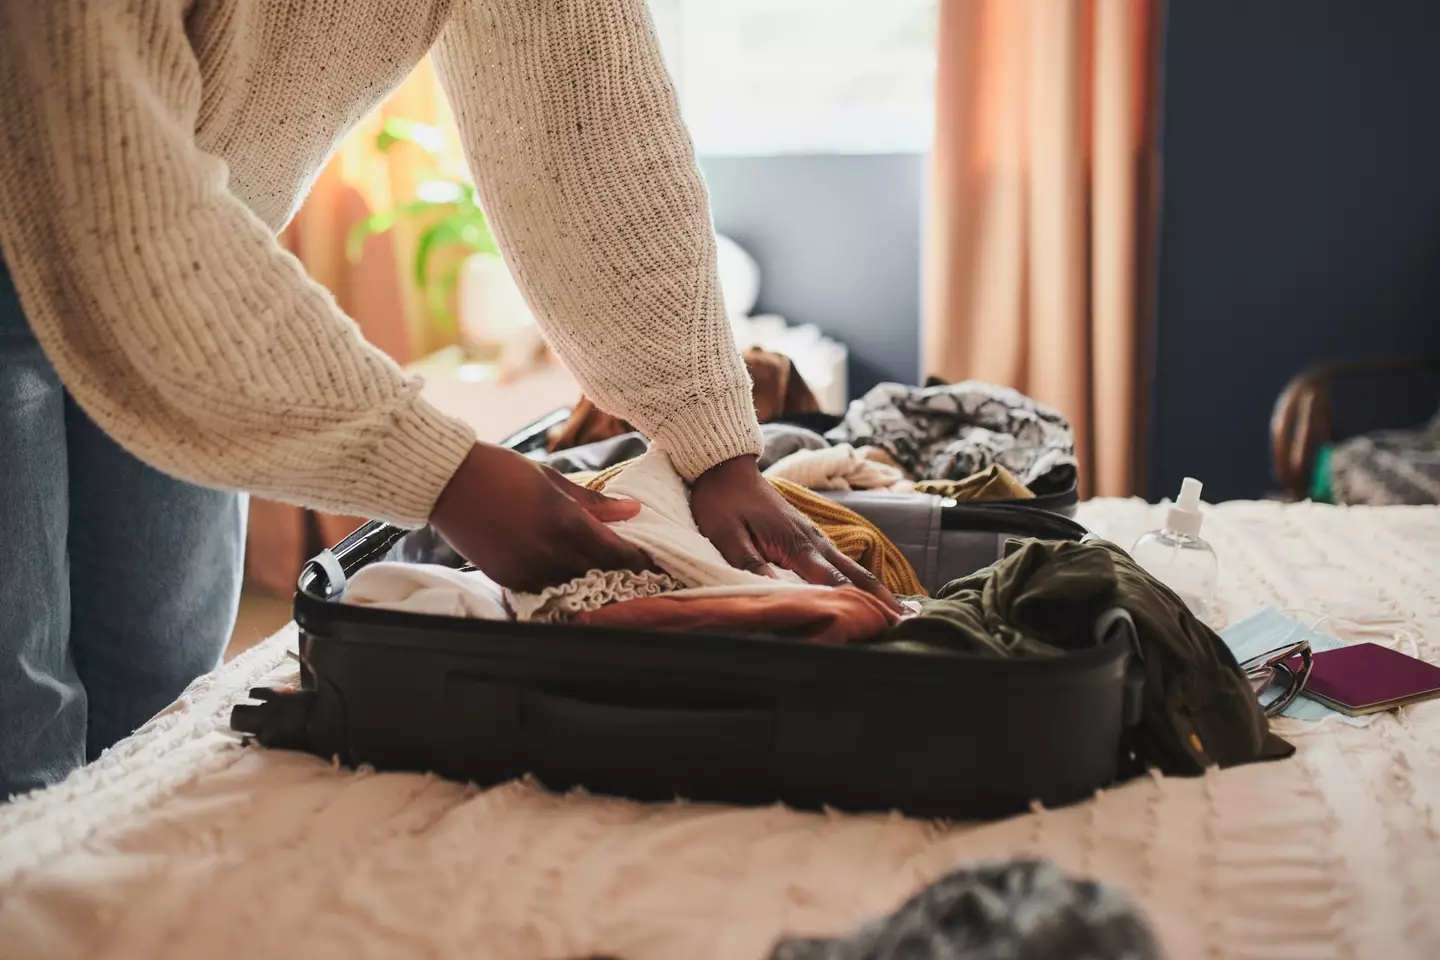 Overloading your suitcase? We've all been there.